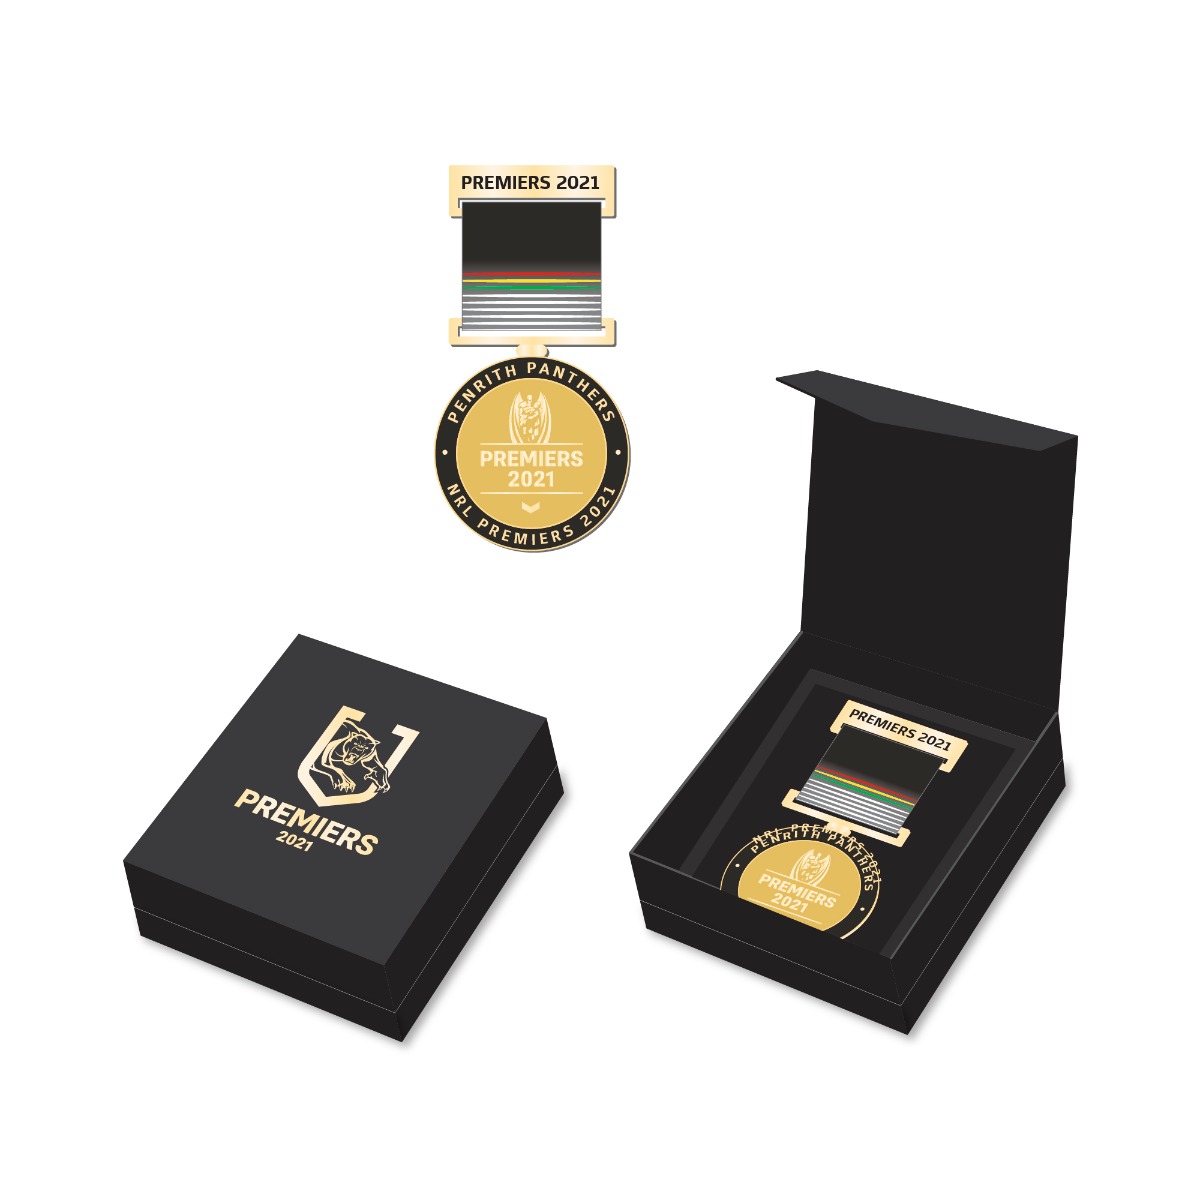 PRE ORDER - Penrith Panthers 2021 NRL Premiers Boxed Medal with Ribbon Pin Badge